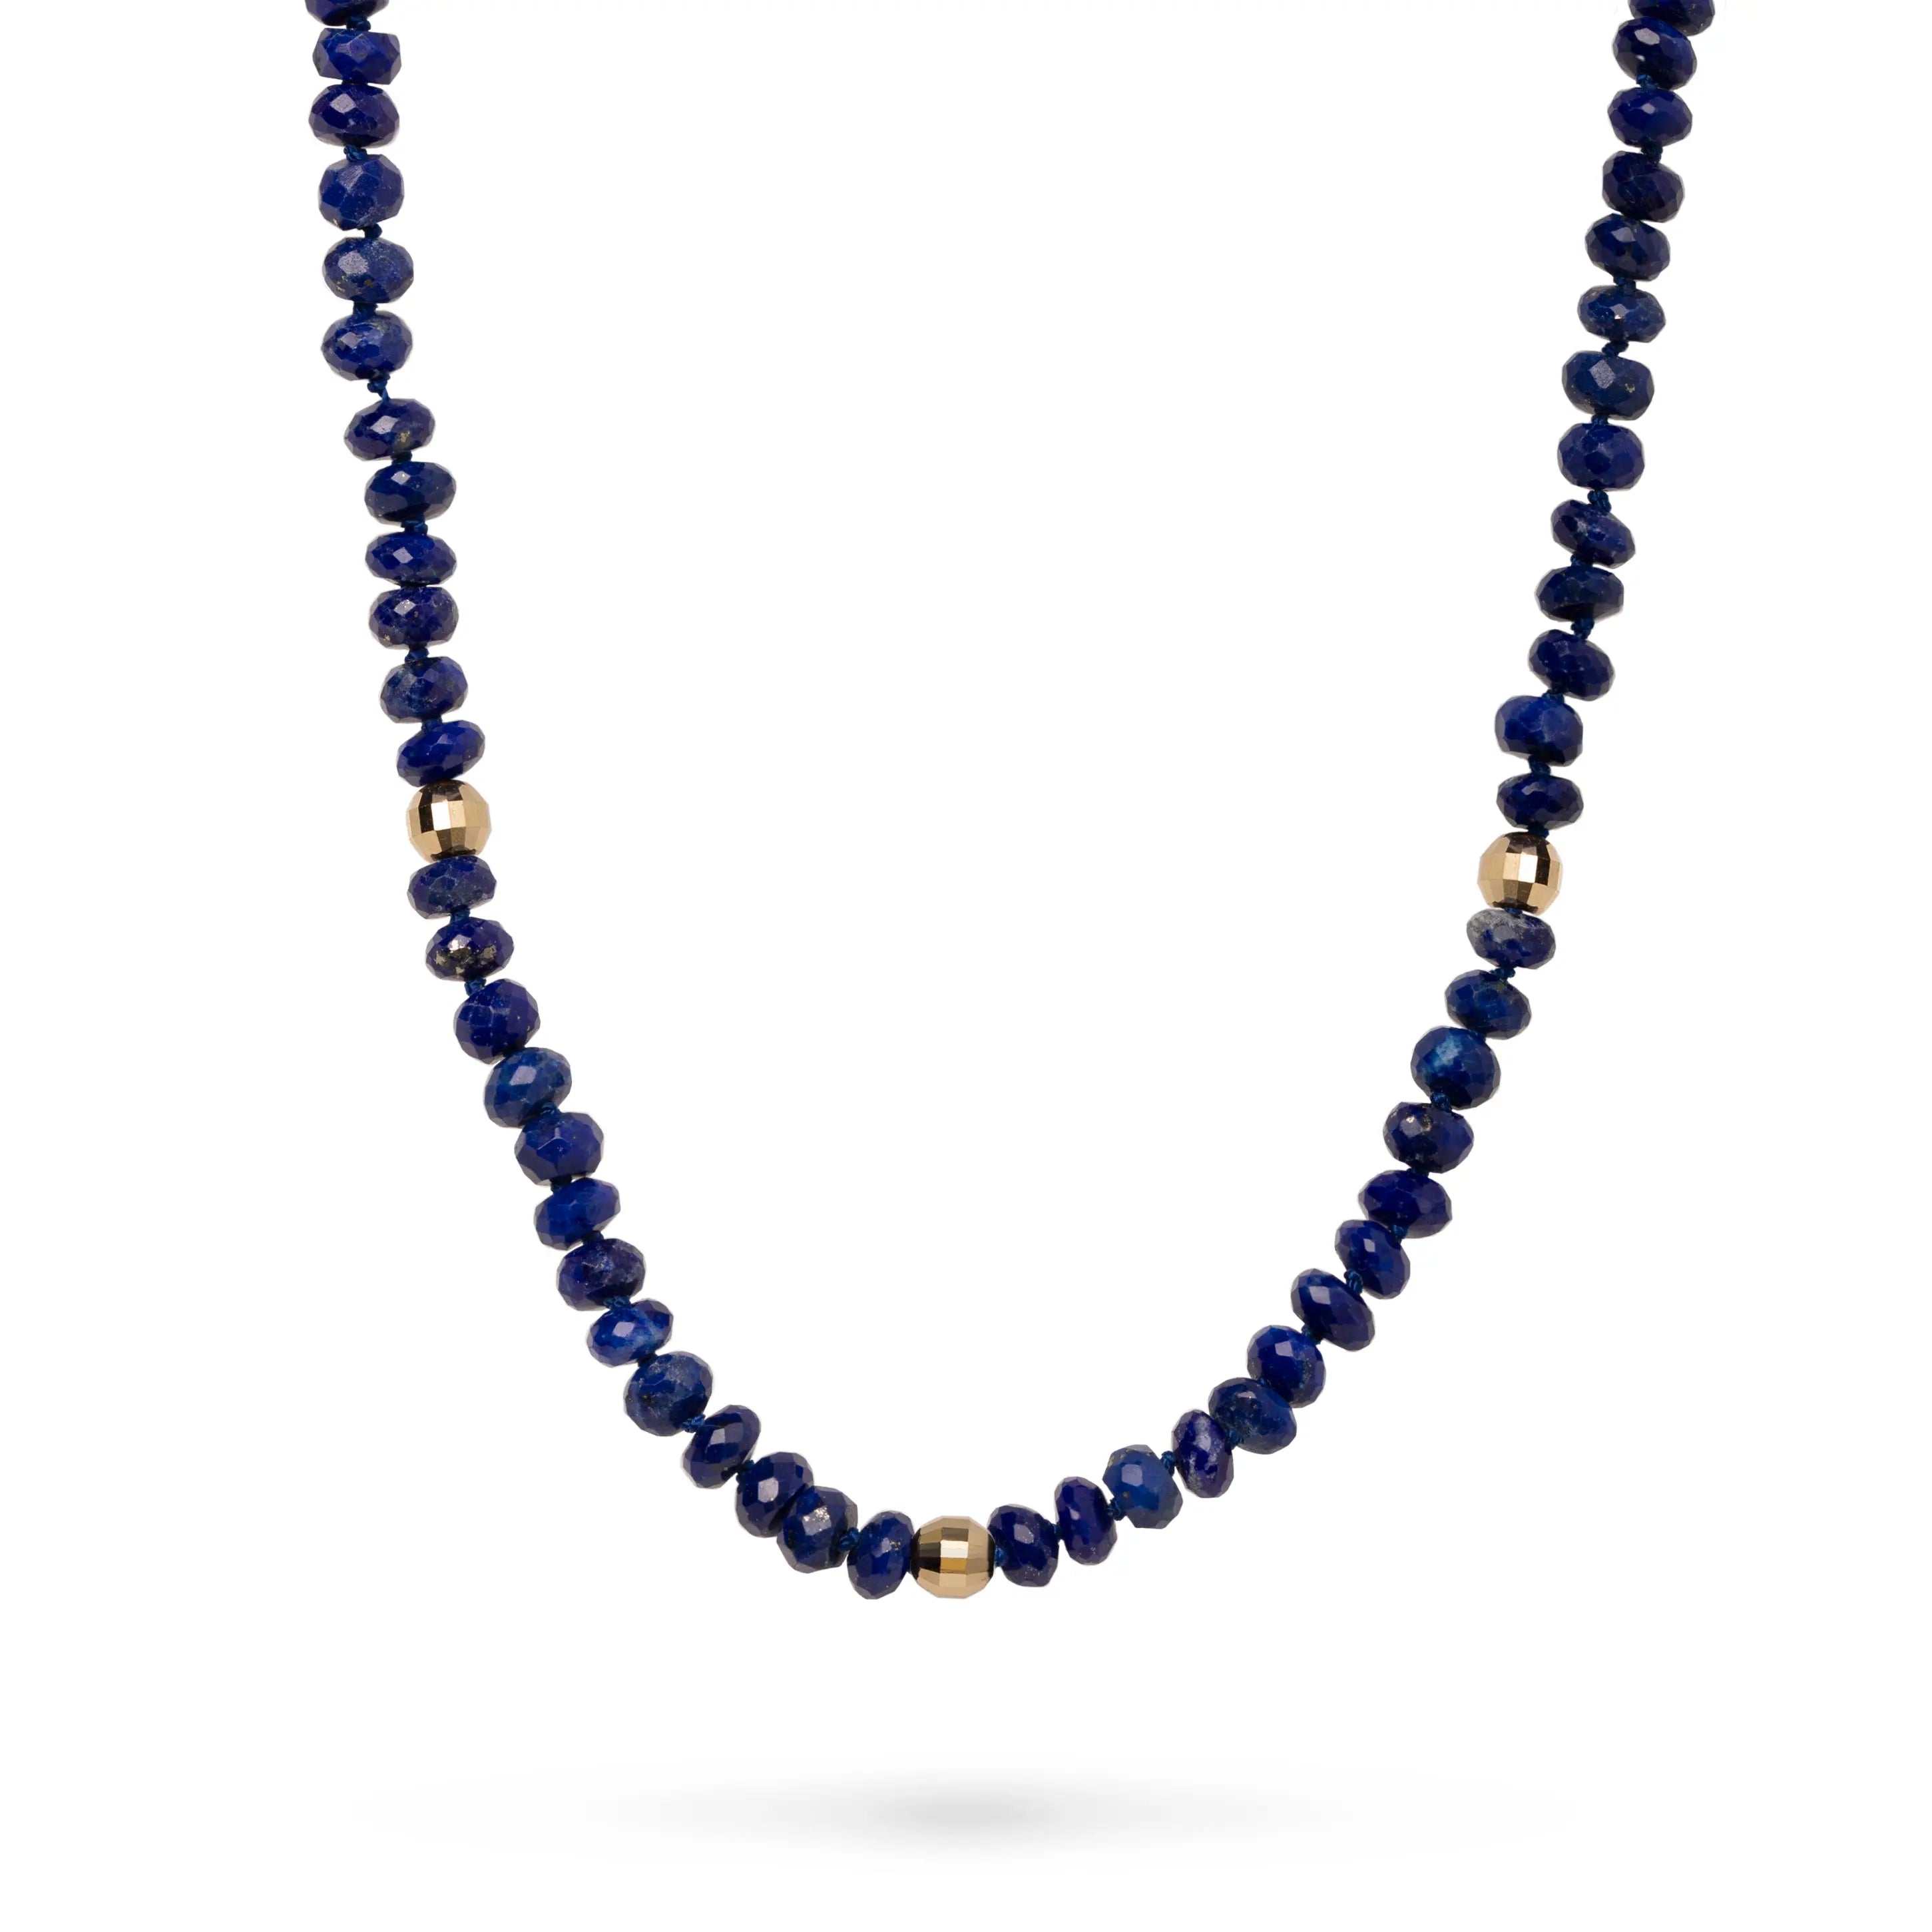 Lapis Necklace and Gold Beads